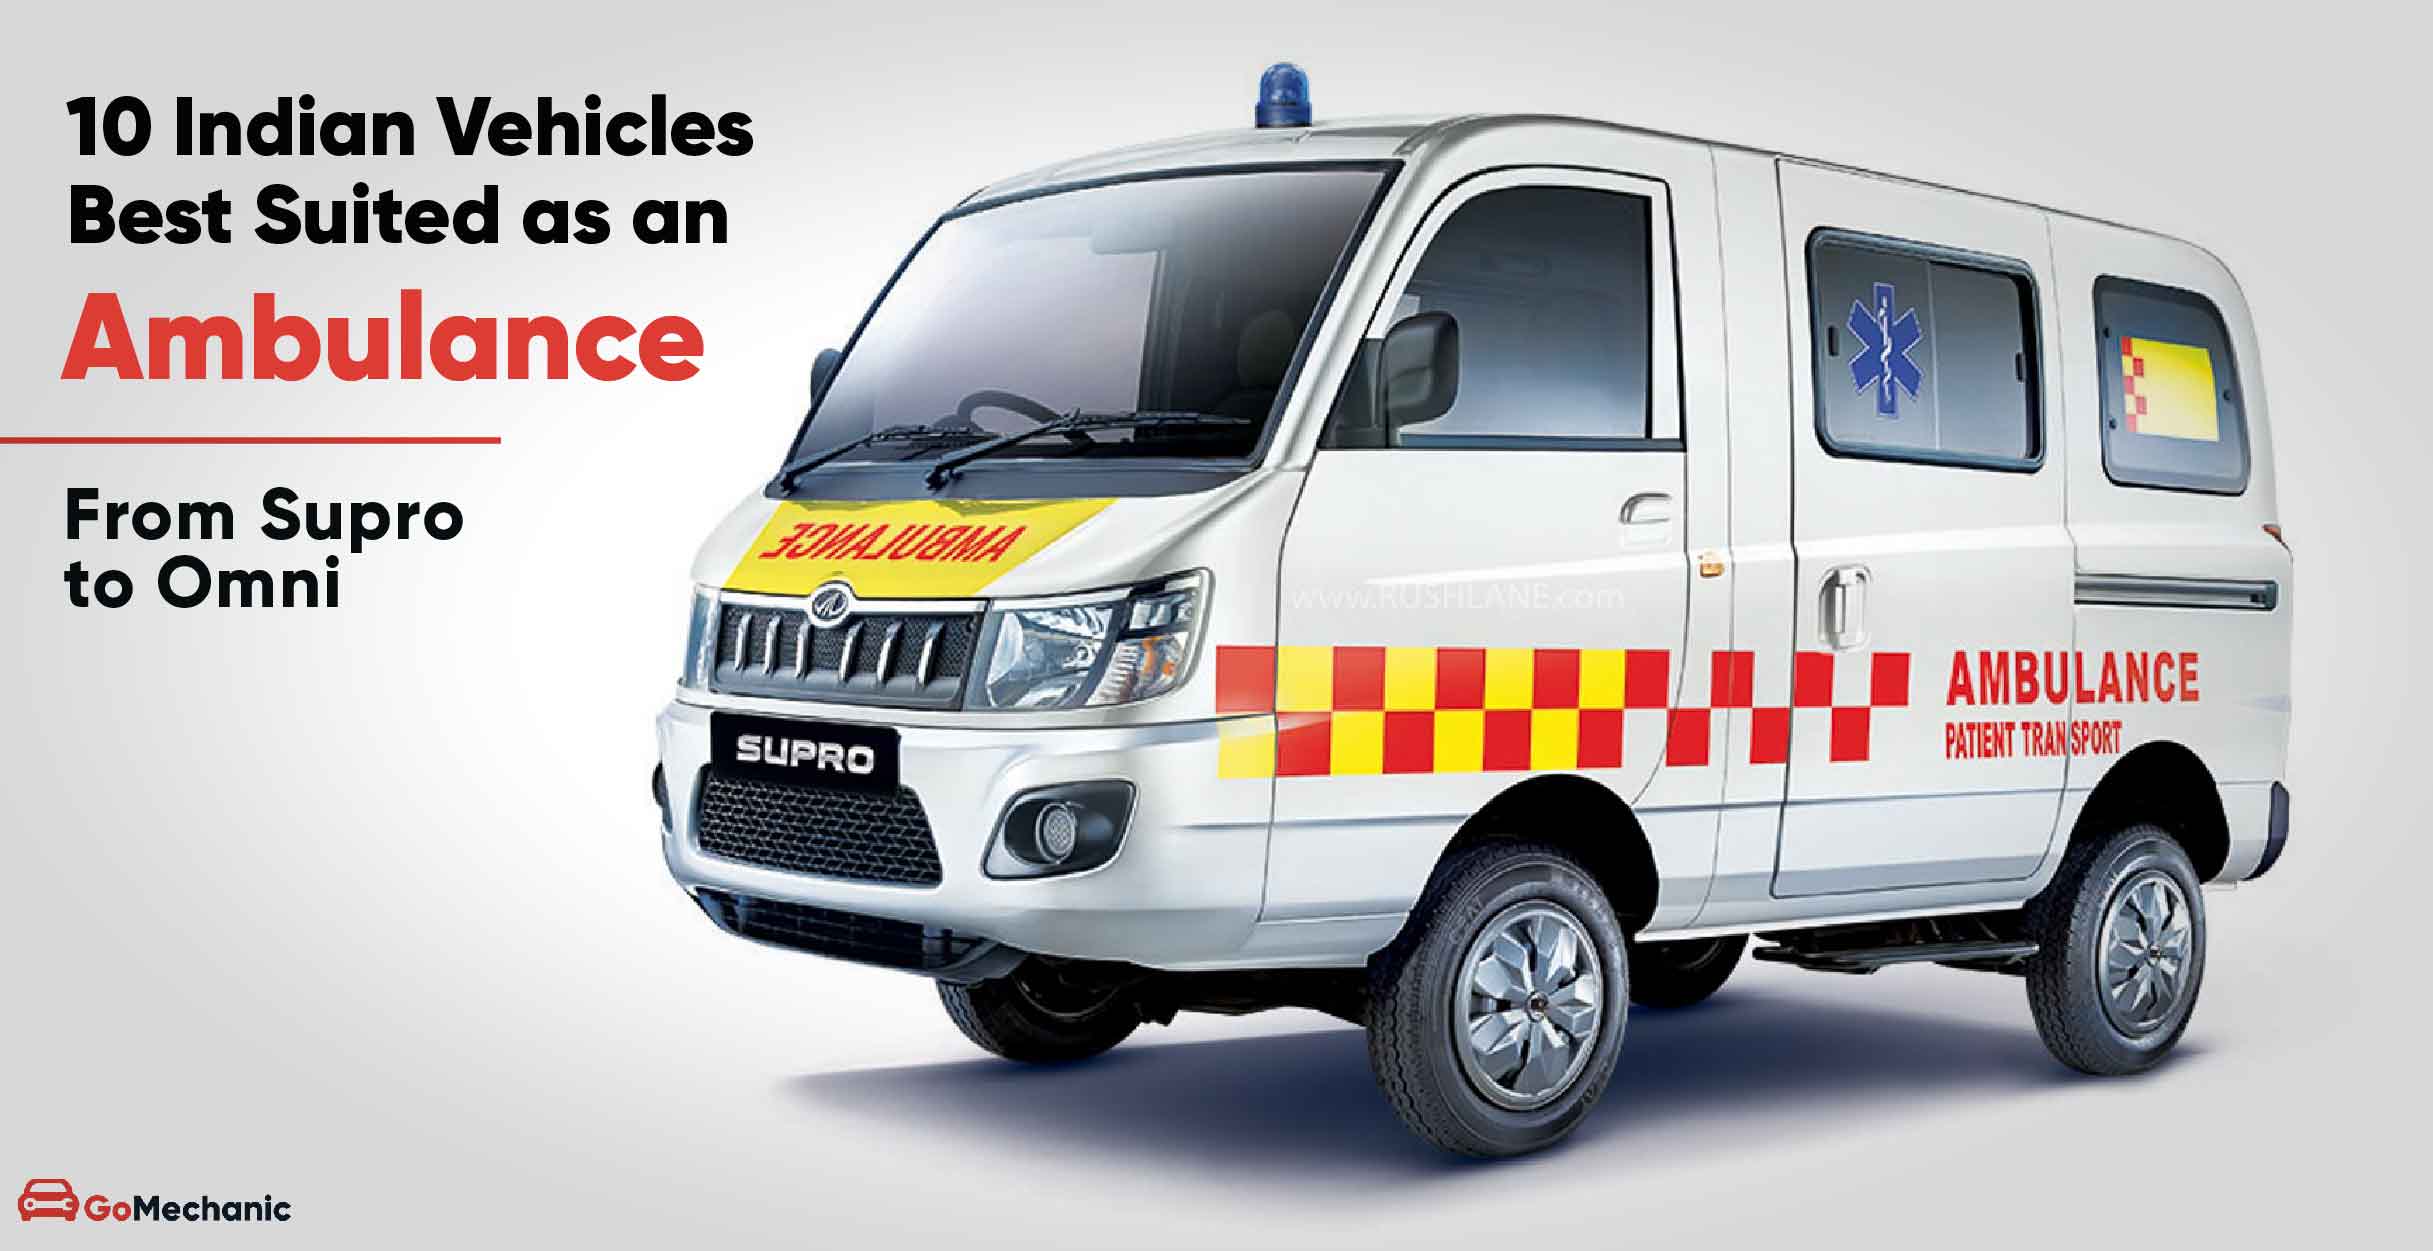 10 Indian Vehicles Best Suited as an Ambulance (Emergency Response)